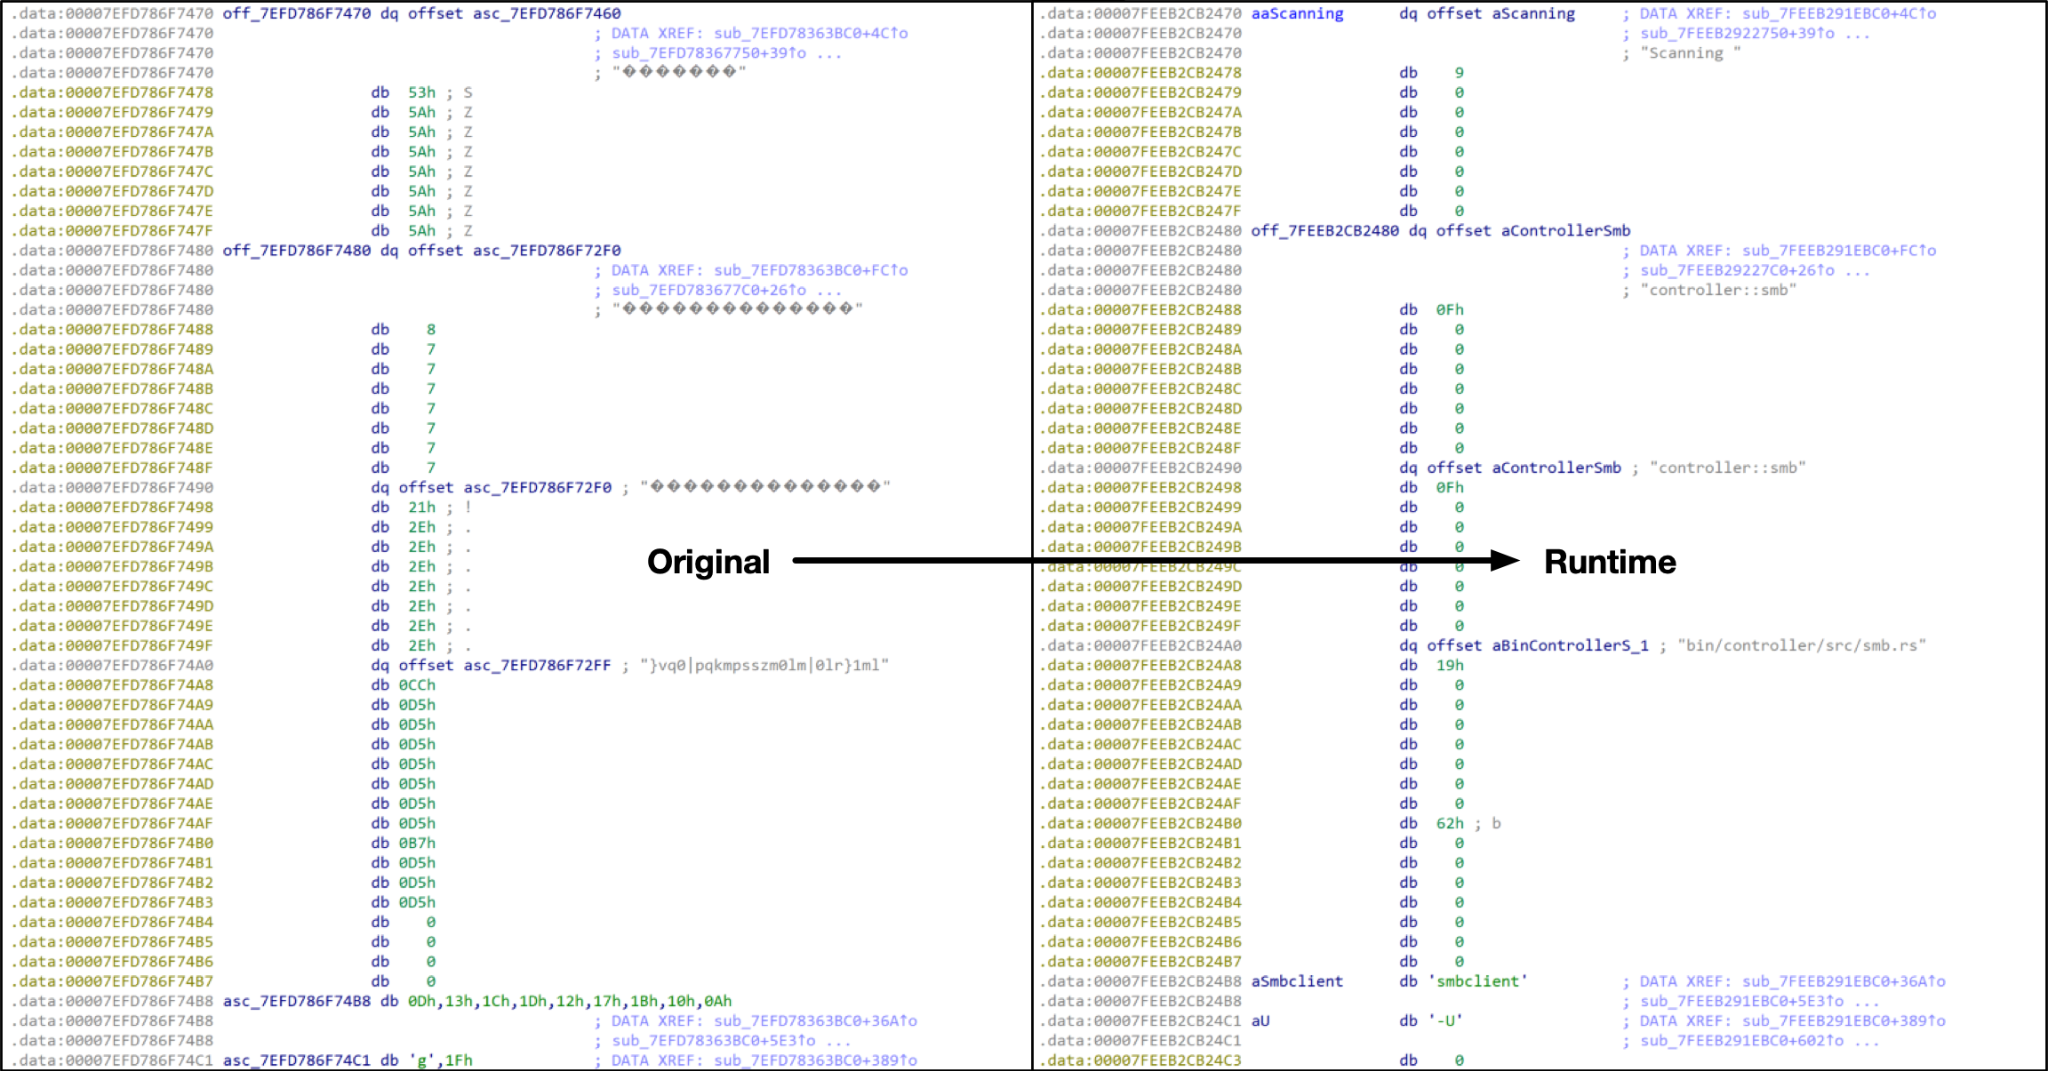 Image 2 is a comparison of two screenshots of code. The screenshot on the left is the original. The screenshot on the right is the runtime code that is decrypted. 